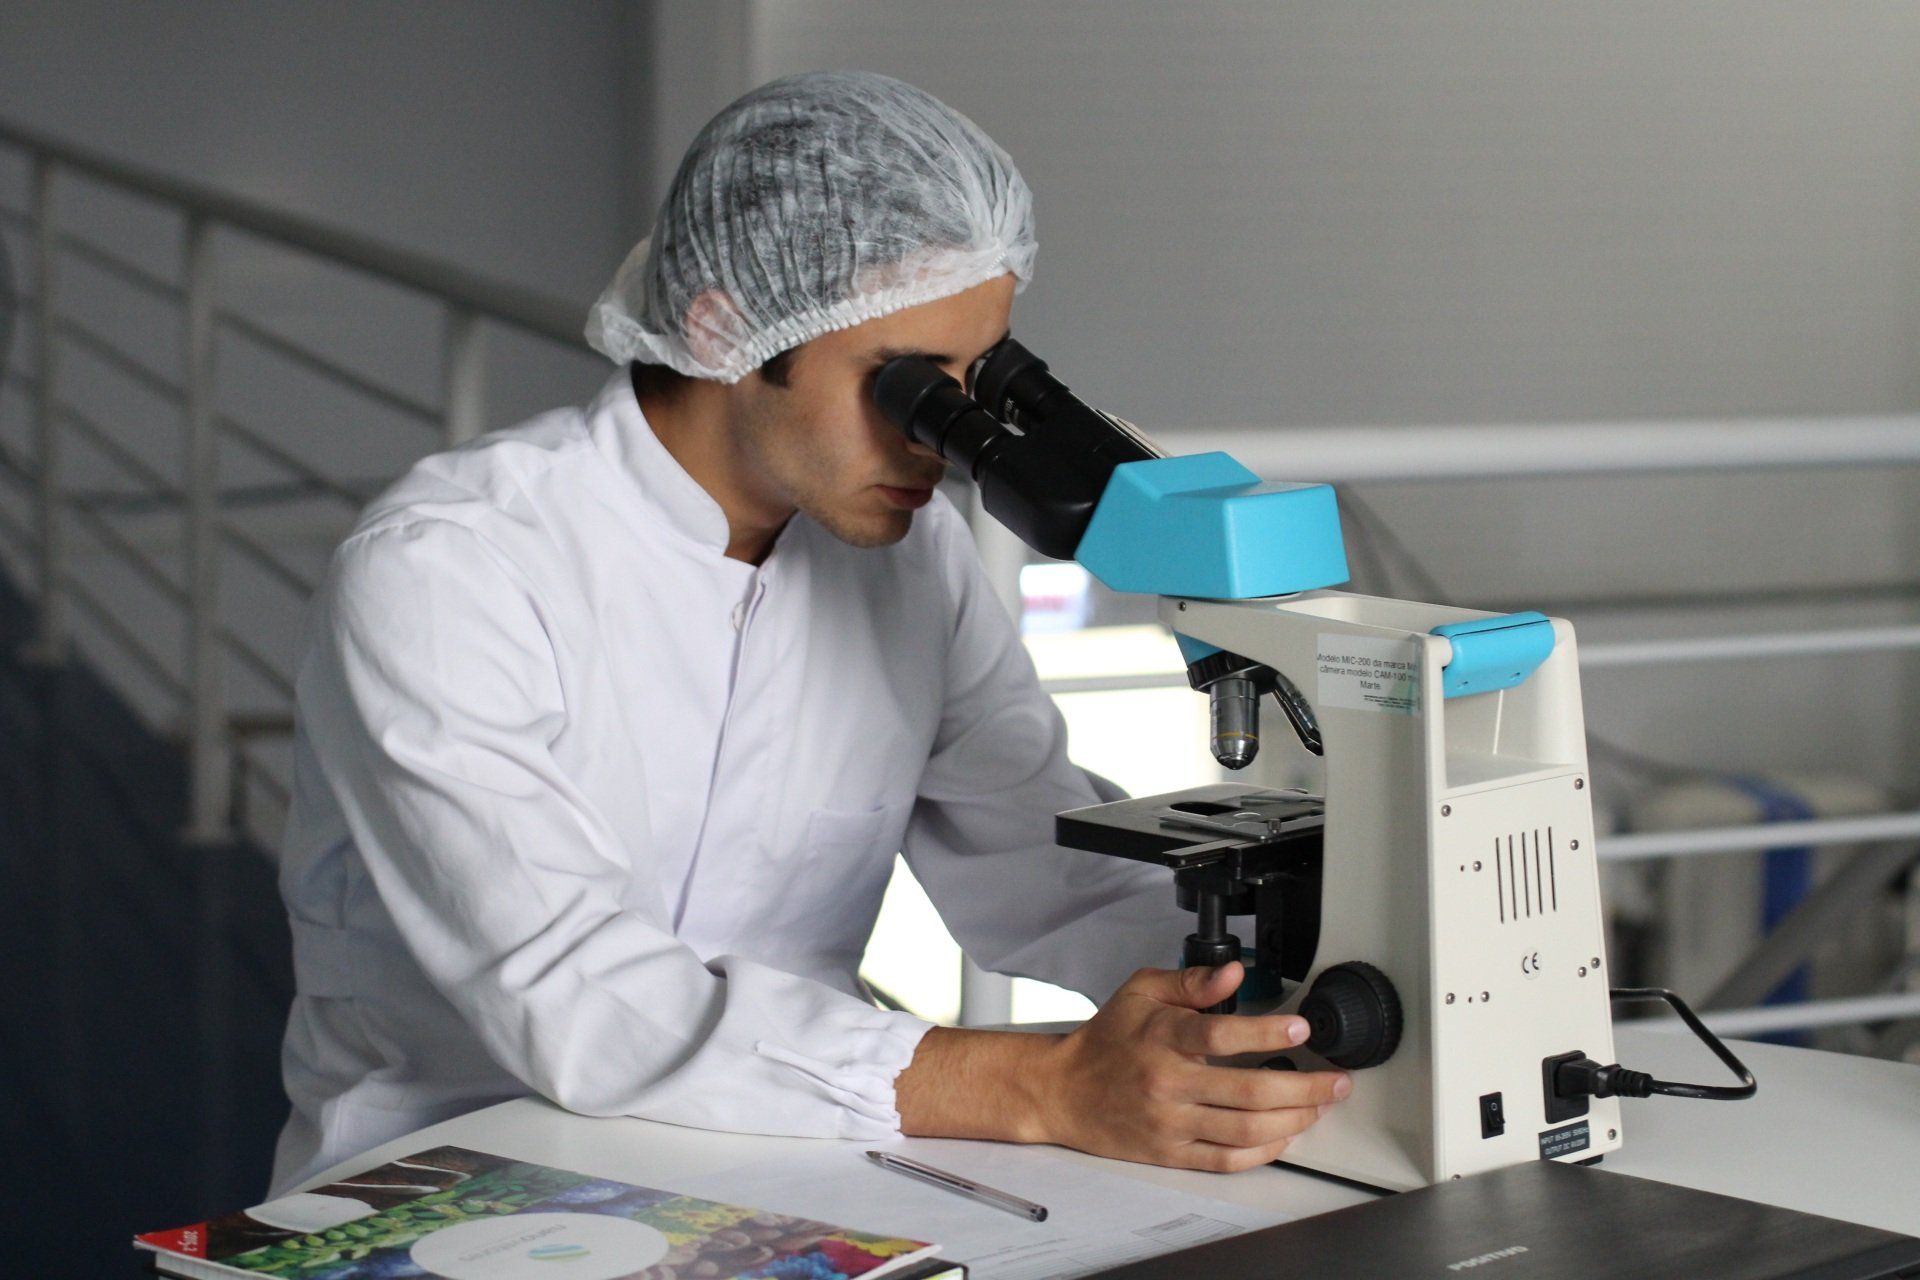 Man wearing white scrubs looking into microscope in a science lab.